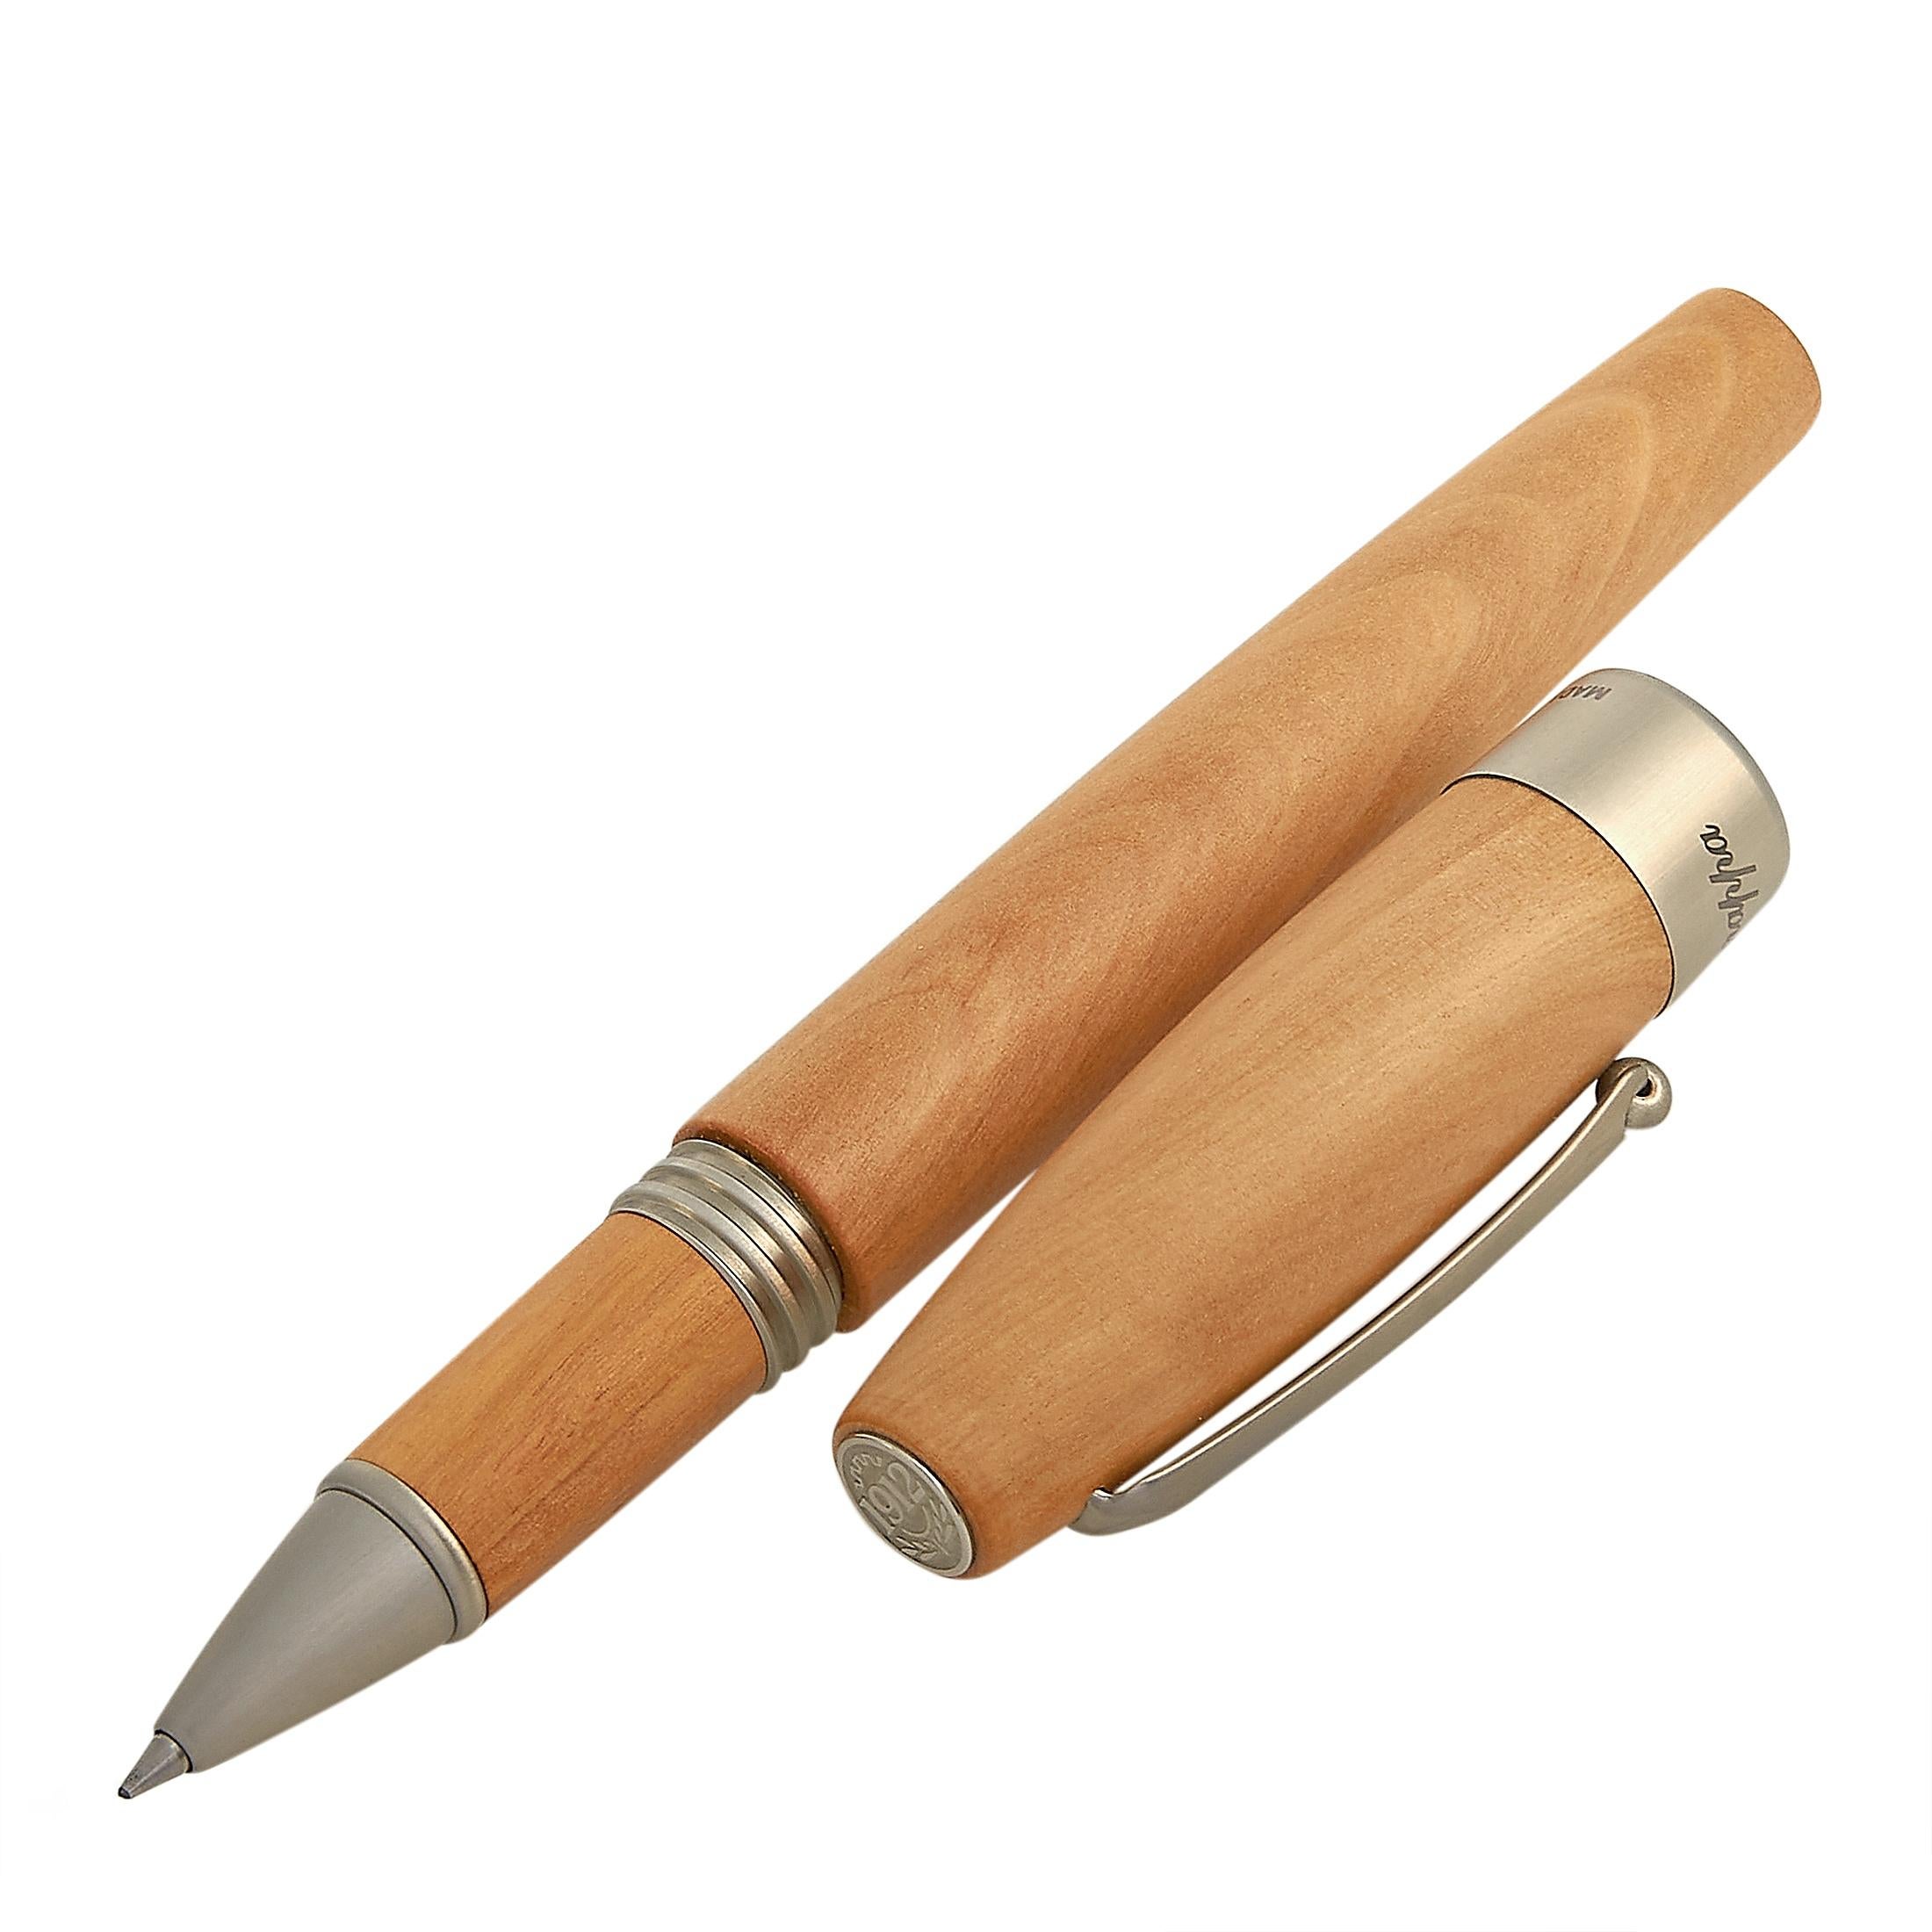 The Montegrappa “Heartwood” rollerball pen is made out of olive wood with stainless steel trim, and boasts the famous “1912” logo on the cap top. The pen weighs 34 grams and measures 143 mm in length and 15.6 mm in diameter.